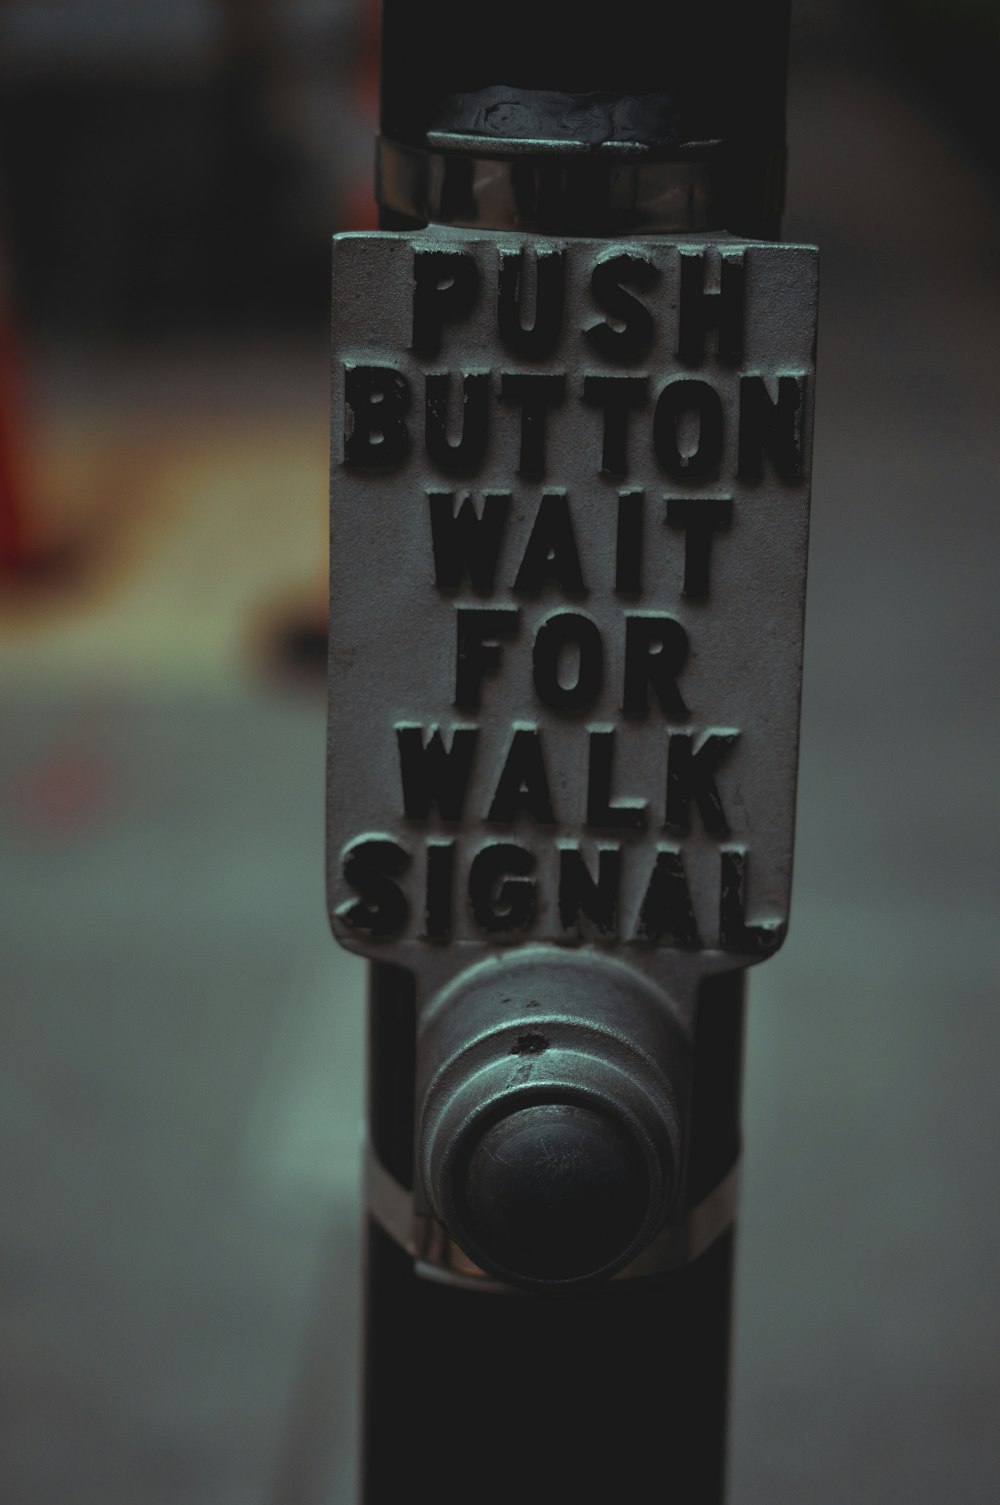 a close up of a parking meter with the words push button wait for walk signal